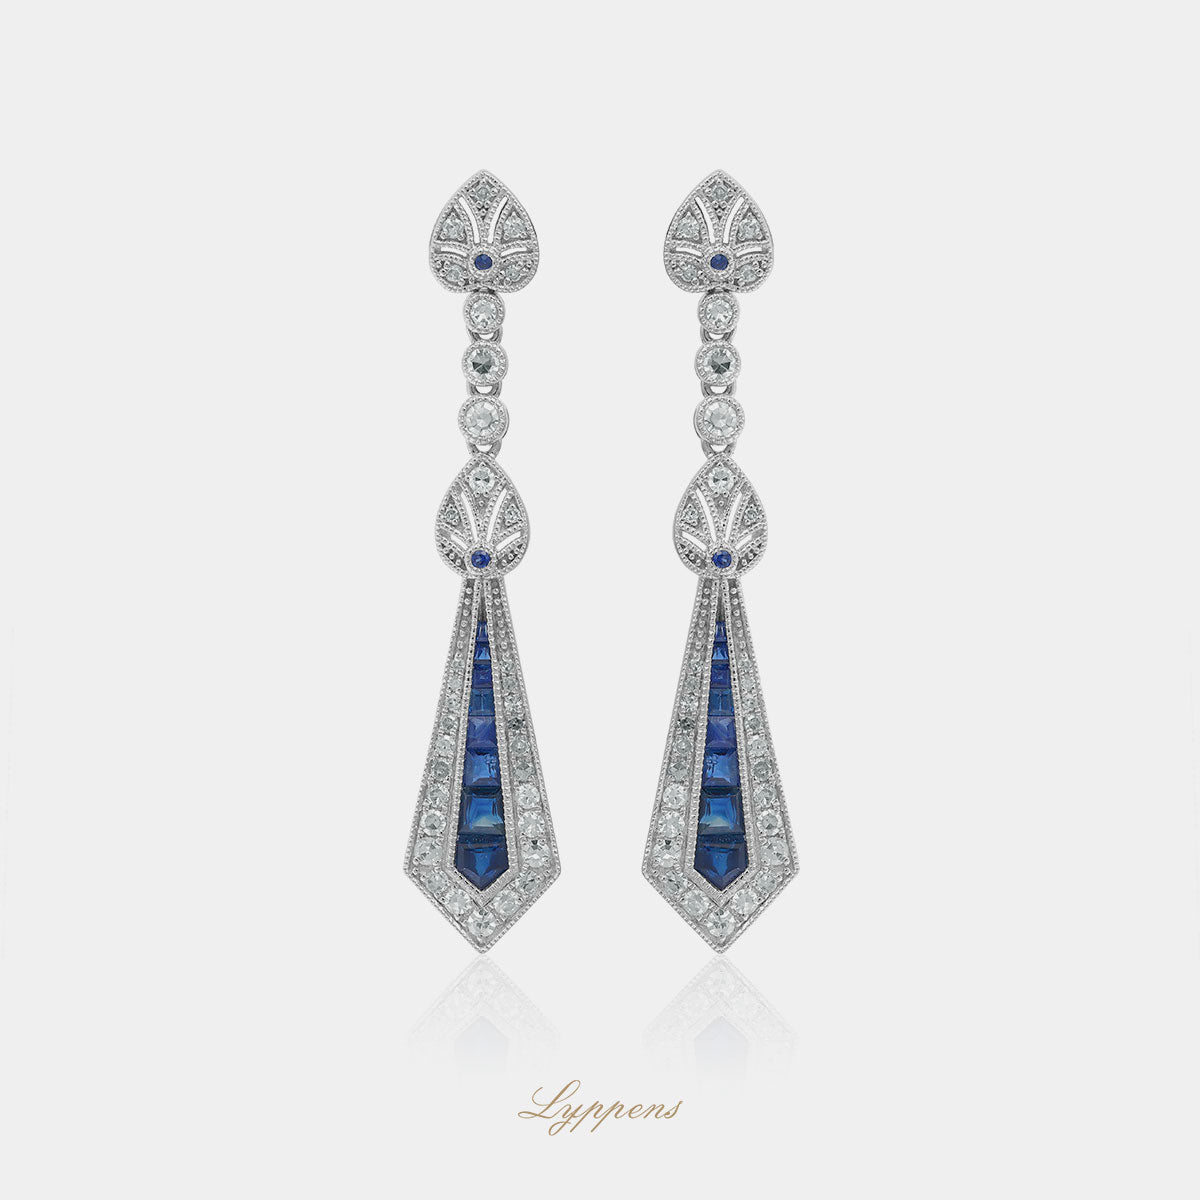 White gold Art Deco style ear studs with sapphire and diamonds